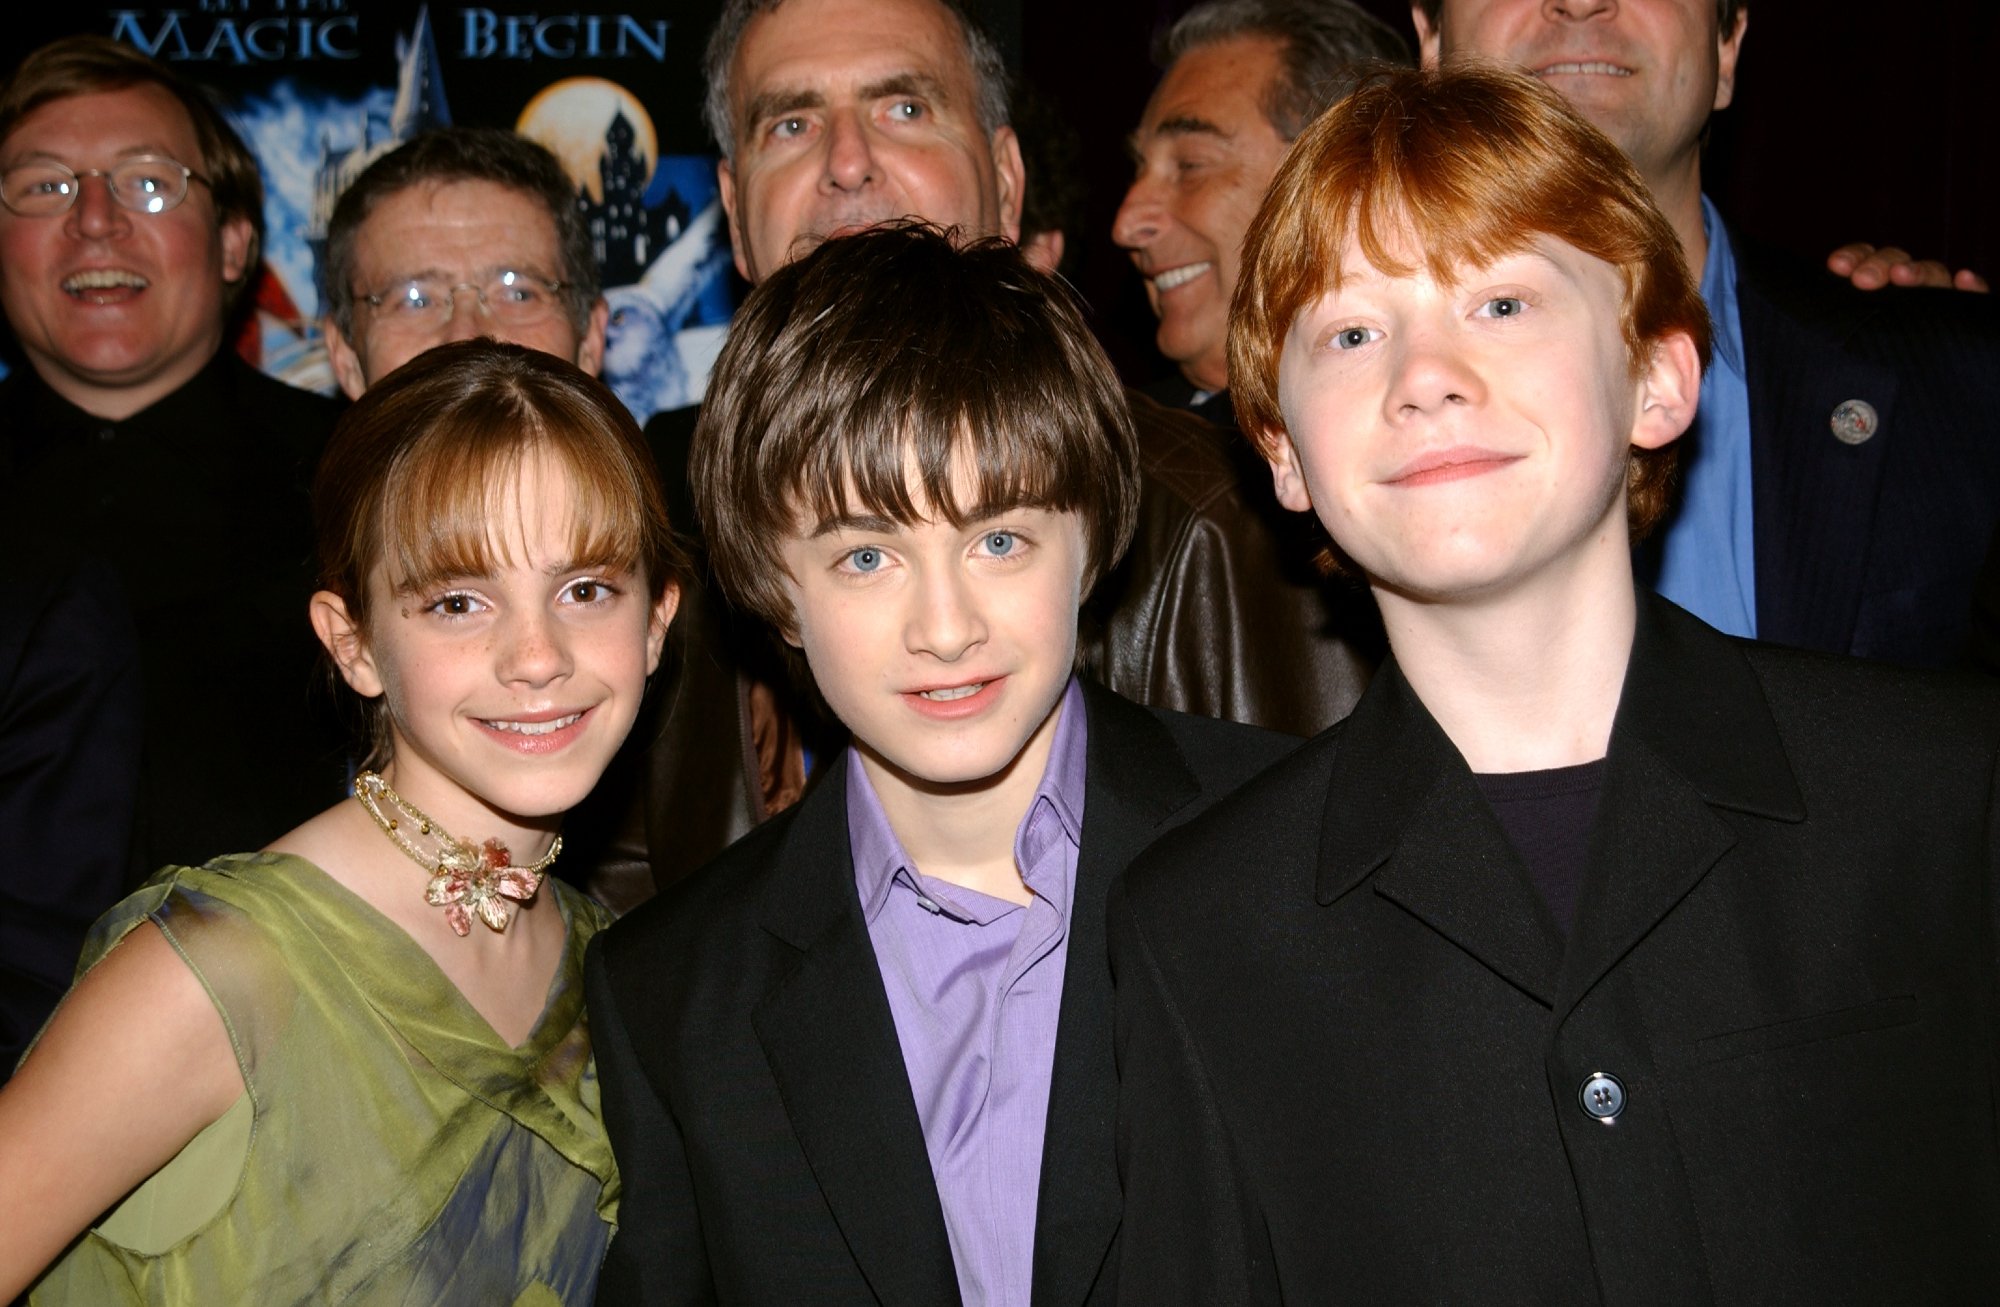 'Harry Potter' movies actors Emma Watson, Daniel Radcliffe, and Rupert Grint smiling in front of a 'Harry Potter' poster and a crowd of people